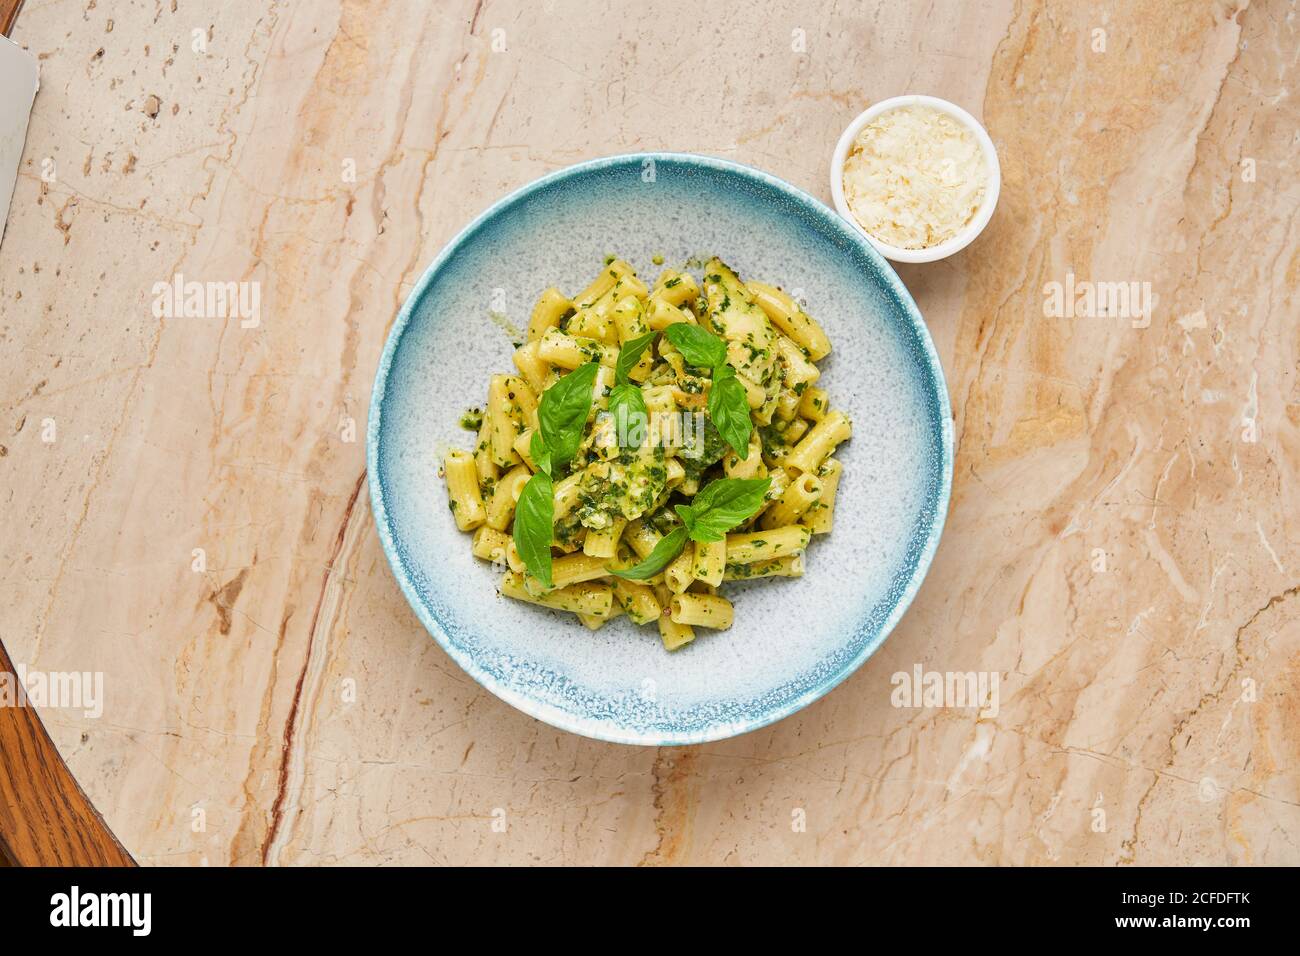 Top view of boiled noodles decorated with green herbs on blue plate served with small bowl of grated cheese Stock Photo